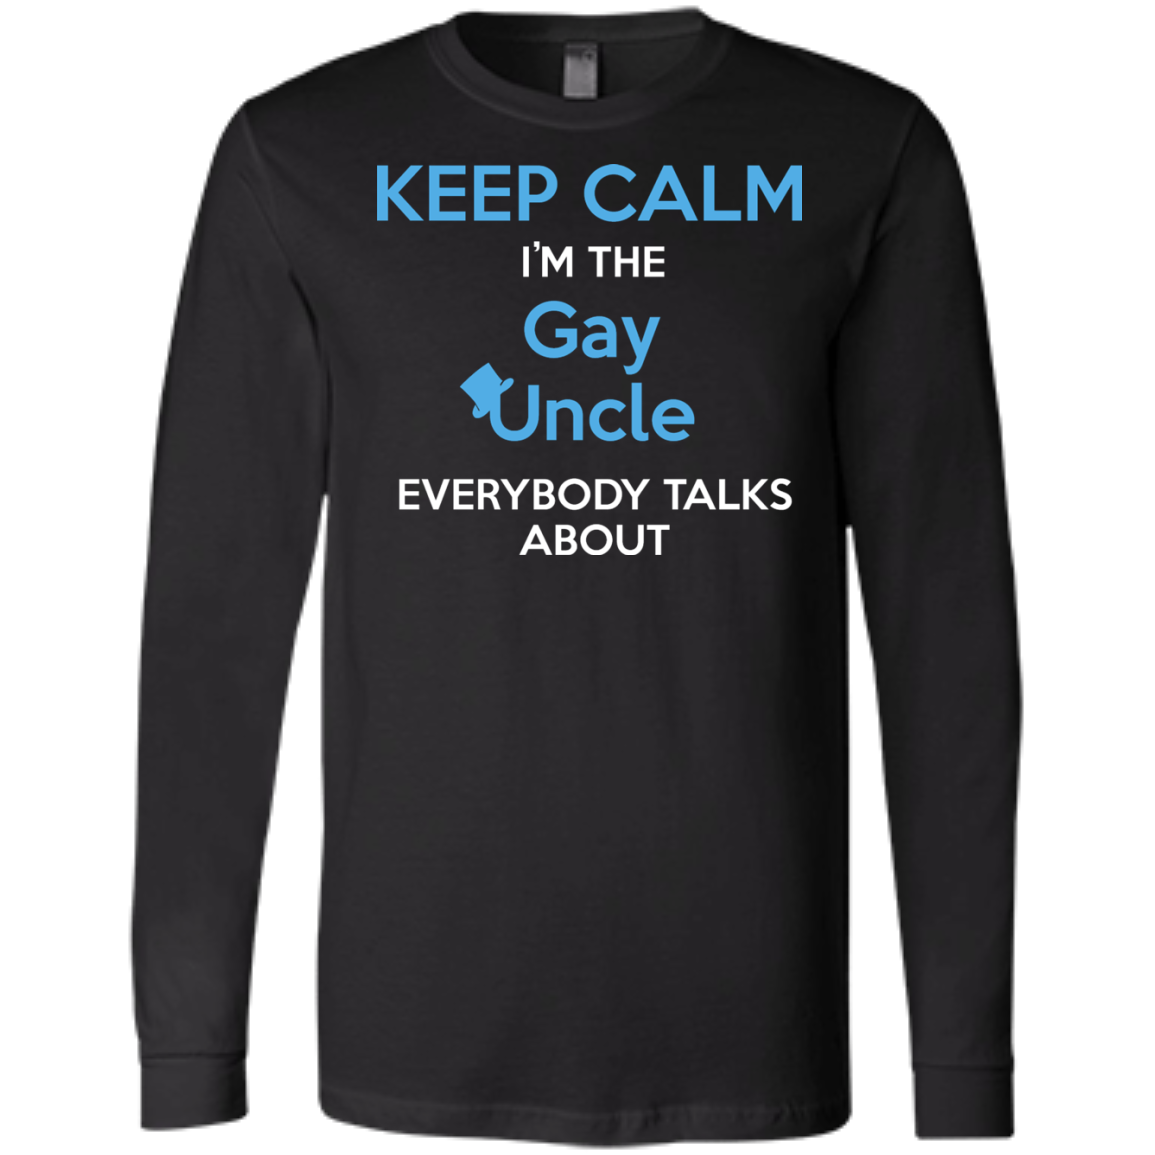 Gay pride full sleevs black Shirt Keep Calm I'm The Gay Uncle quote printed Round neck Shirt for Men